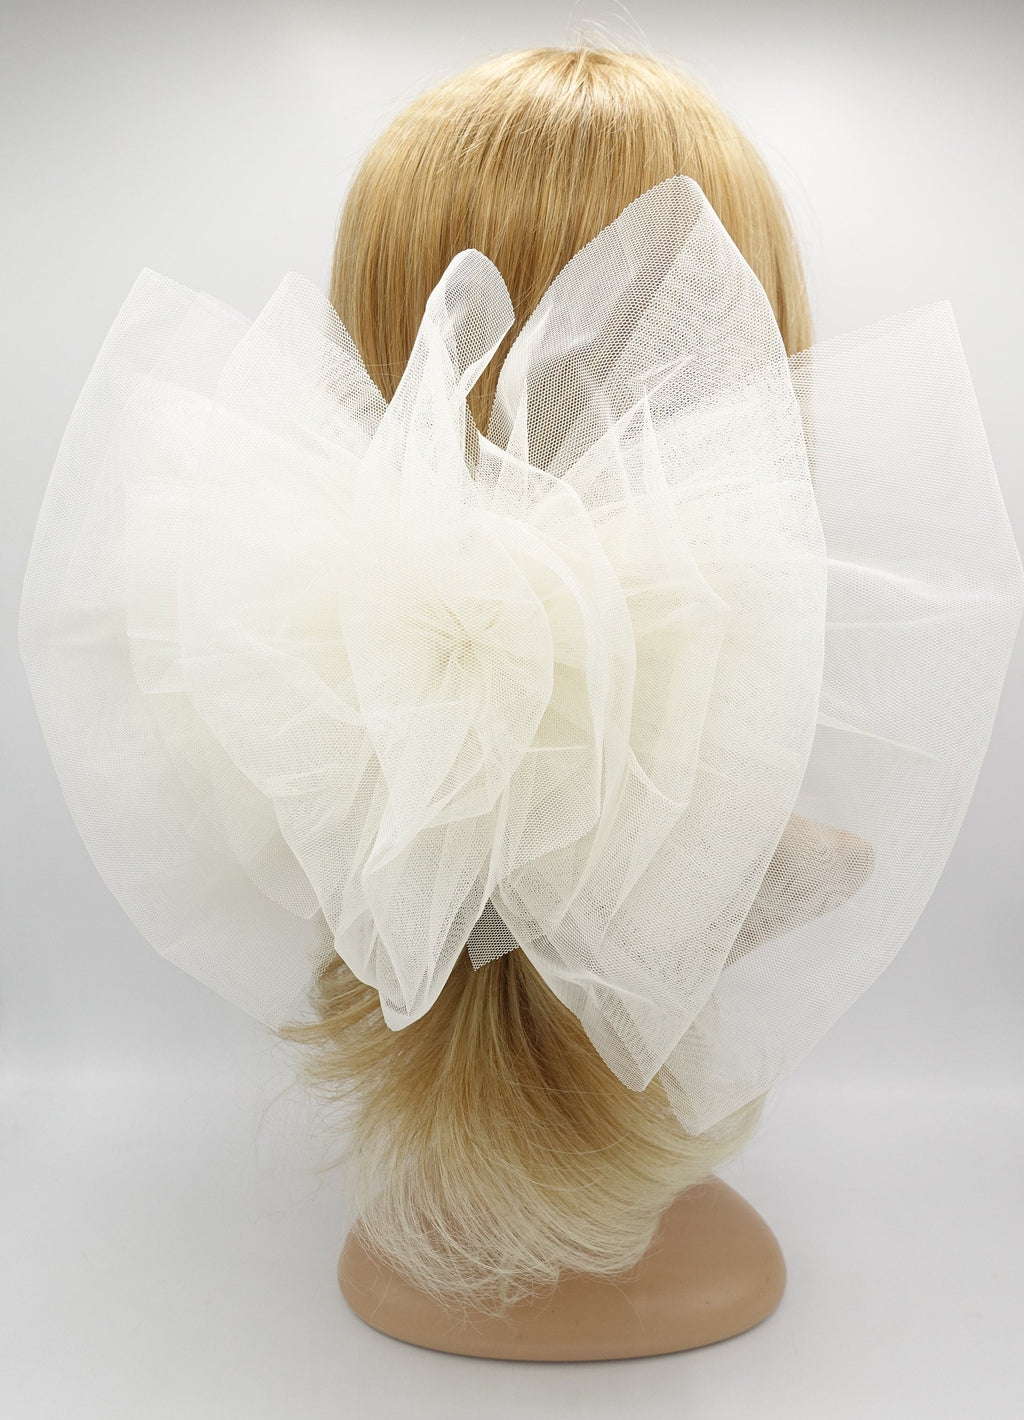 VeryShine Hair Accessories Cream white gigantic tulle hair bow brooch hair accessory for women